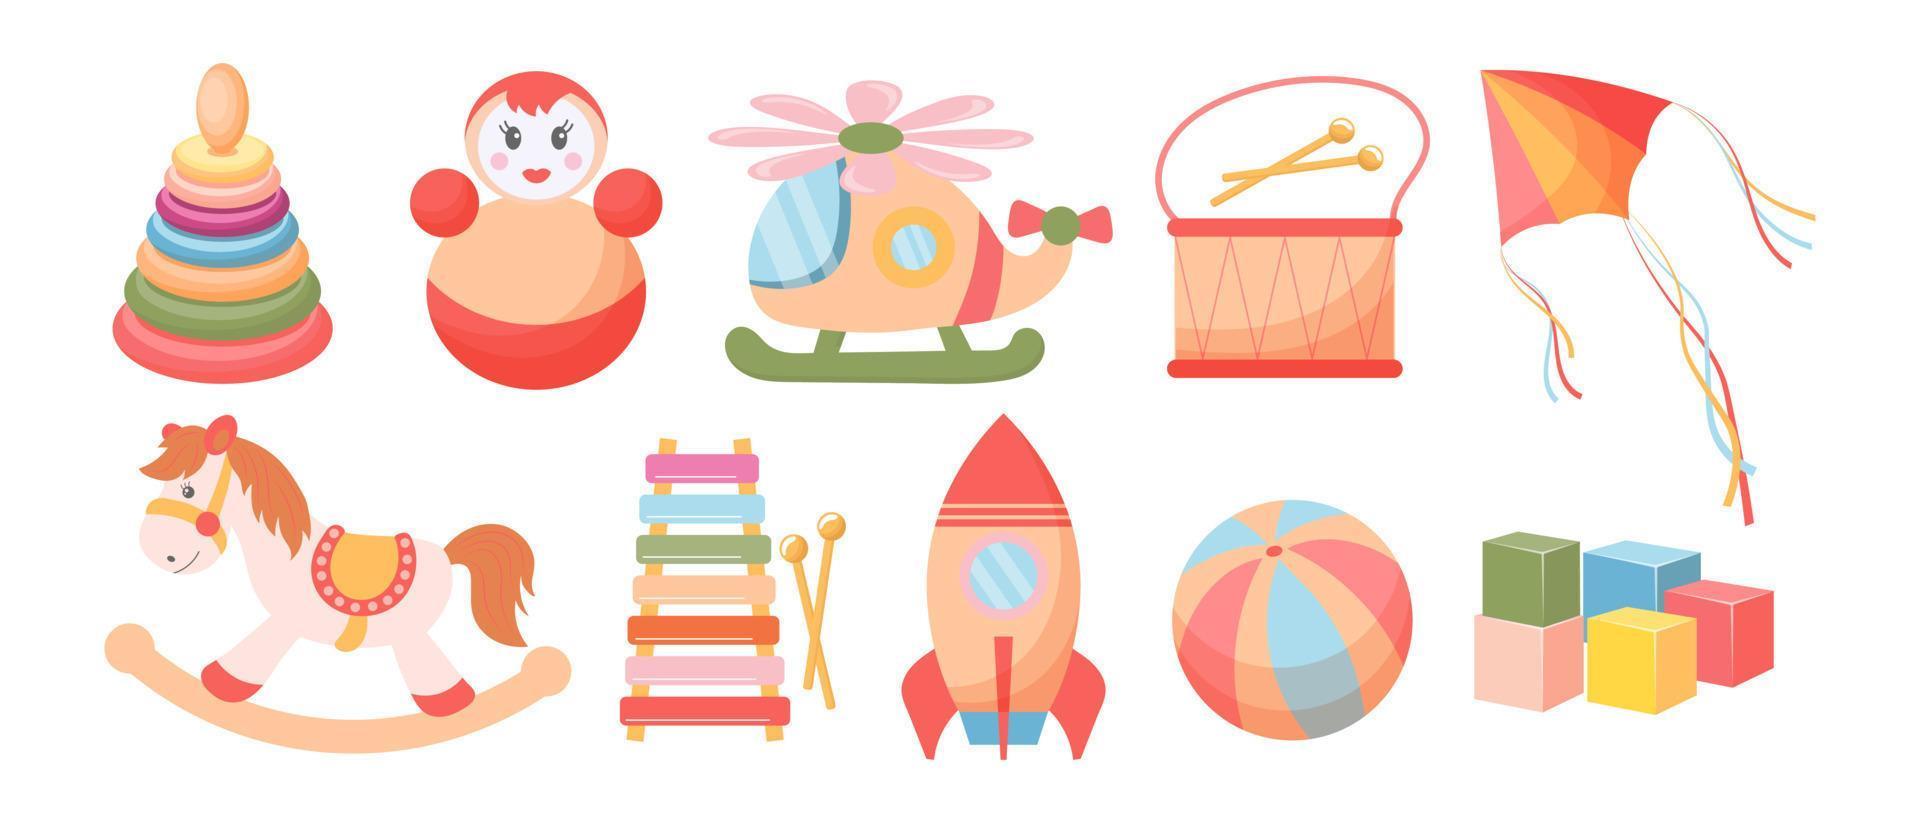 Set of children's toys. Rocket, doll, pyramid, rocking horse, helicopter and drums on a white background. Baby toys icons, vector